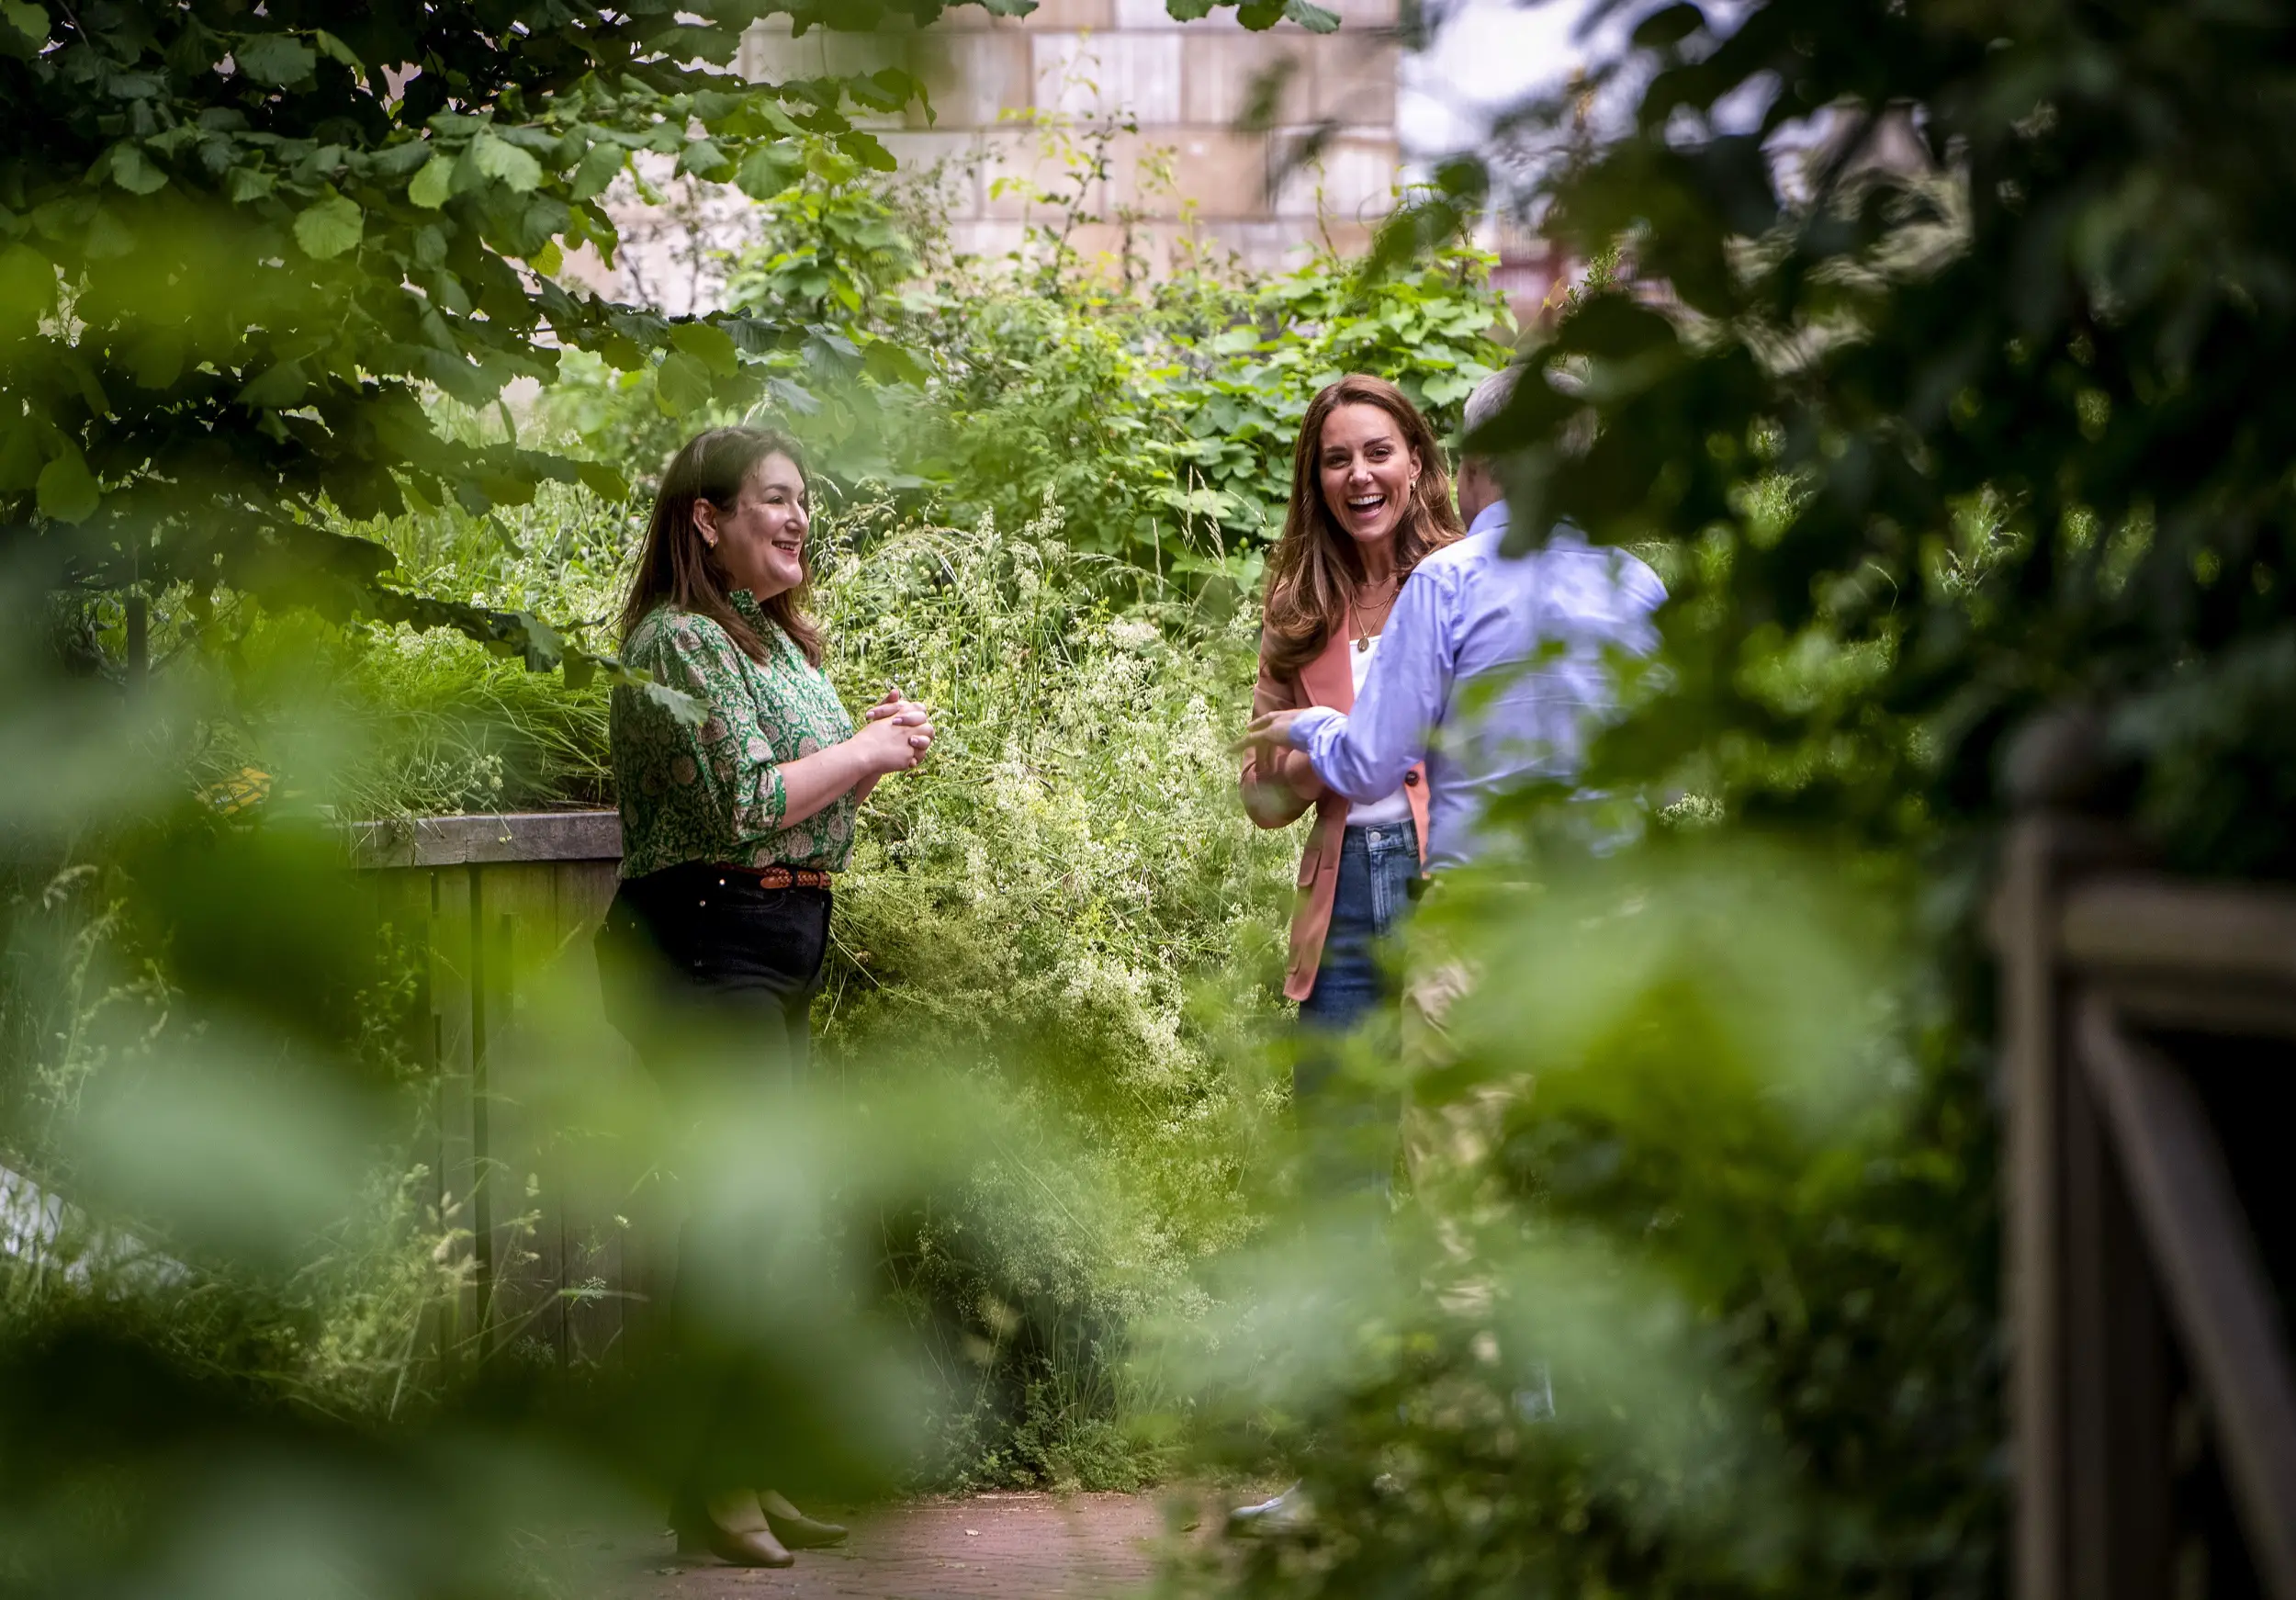 The Duchess of Cambridge heard about the plans for the project and the work that is being carried out to transform the Natural History Museum gardens into a cutting-edge research centre